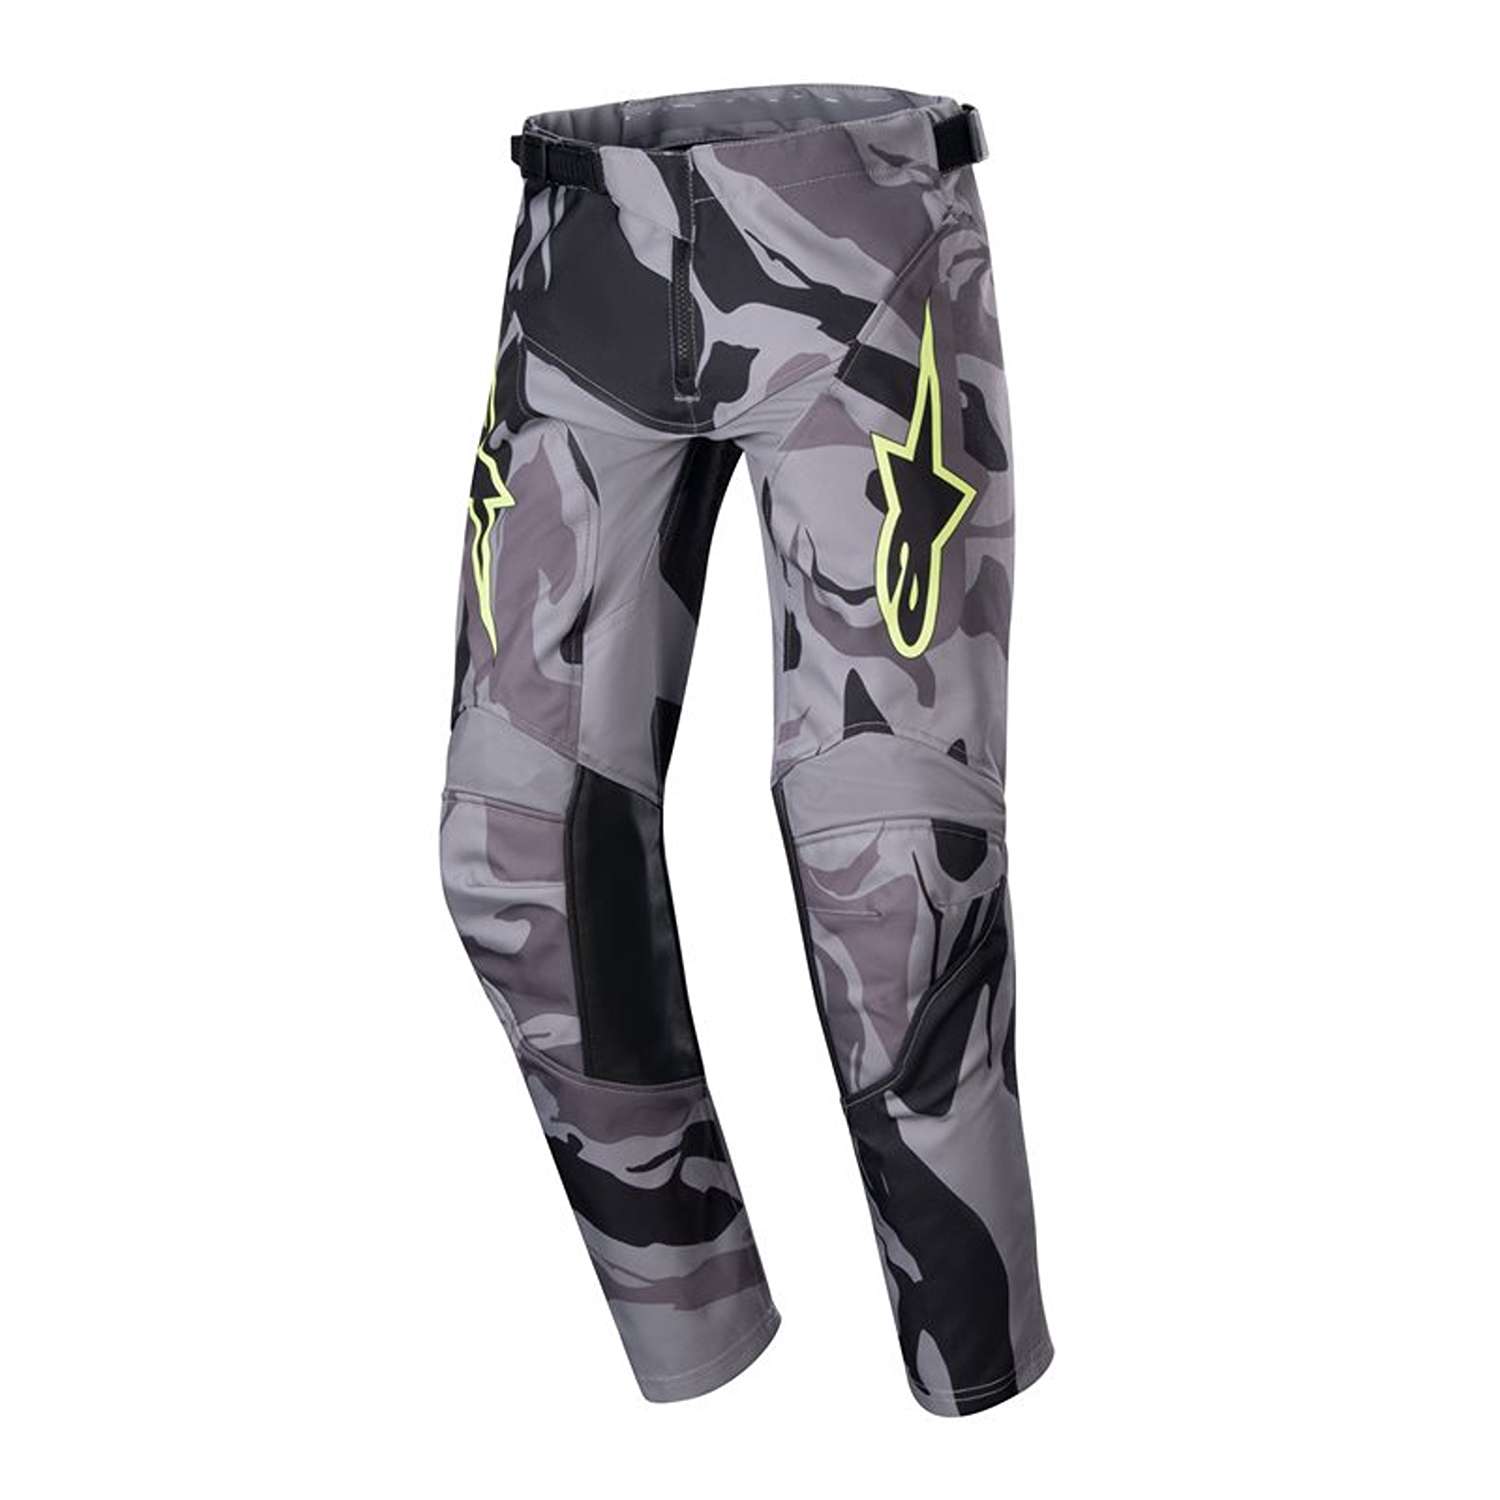 Image of Alpinestars Youth Racer Tactical Pants Cast Gray Camo Magnet Talla 22